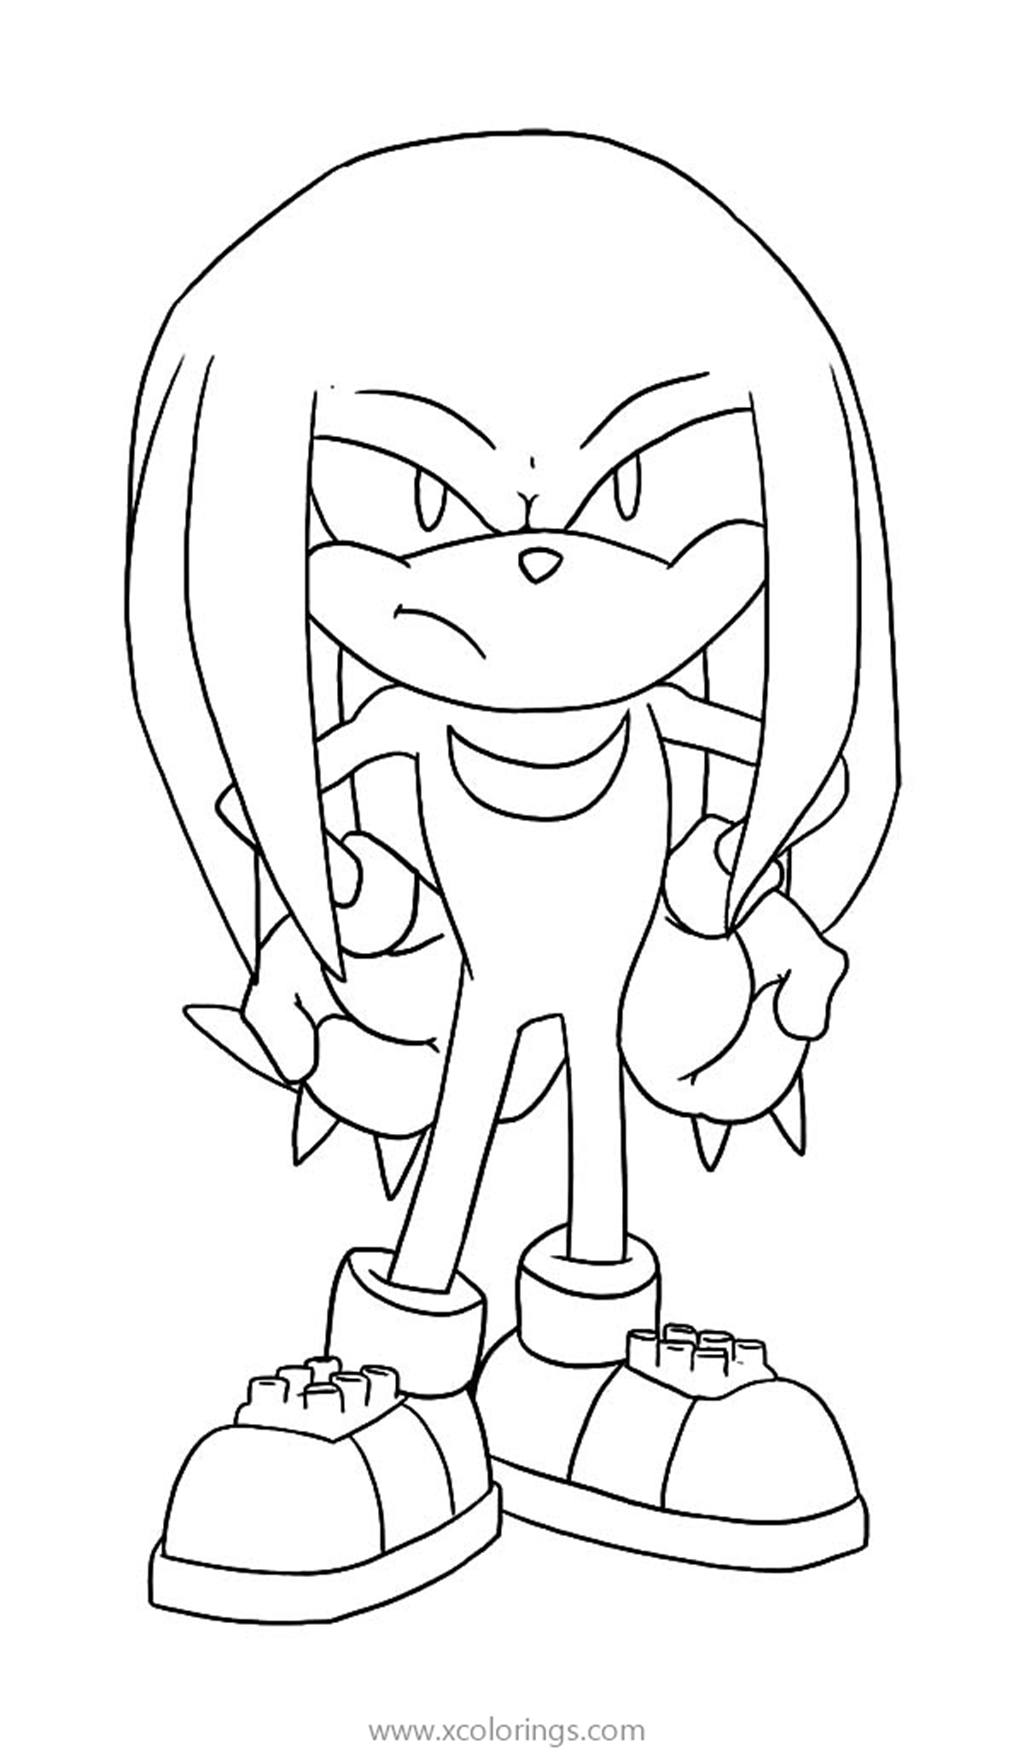 42+ Knuckles Sonic The Hedgehog Coloring Pages | Roundrobinswap